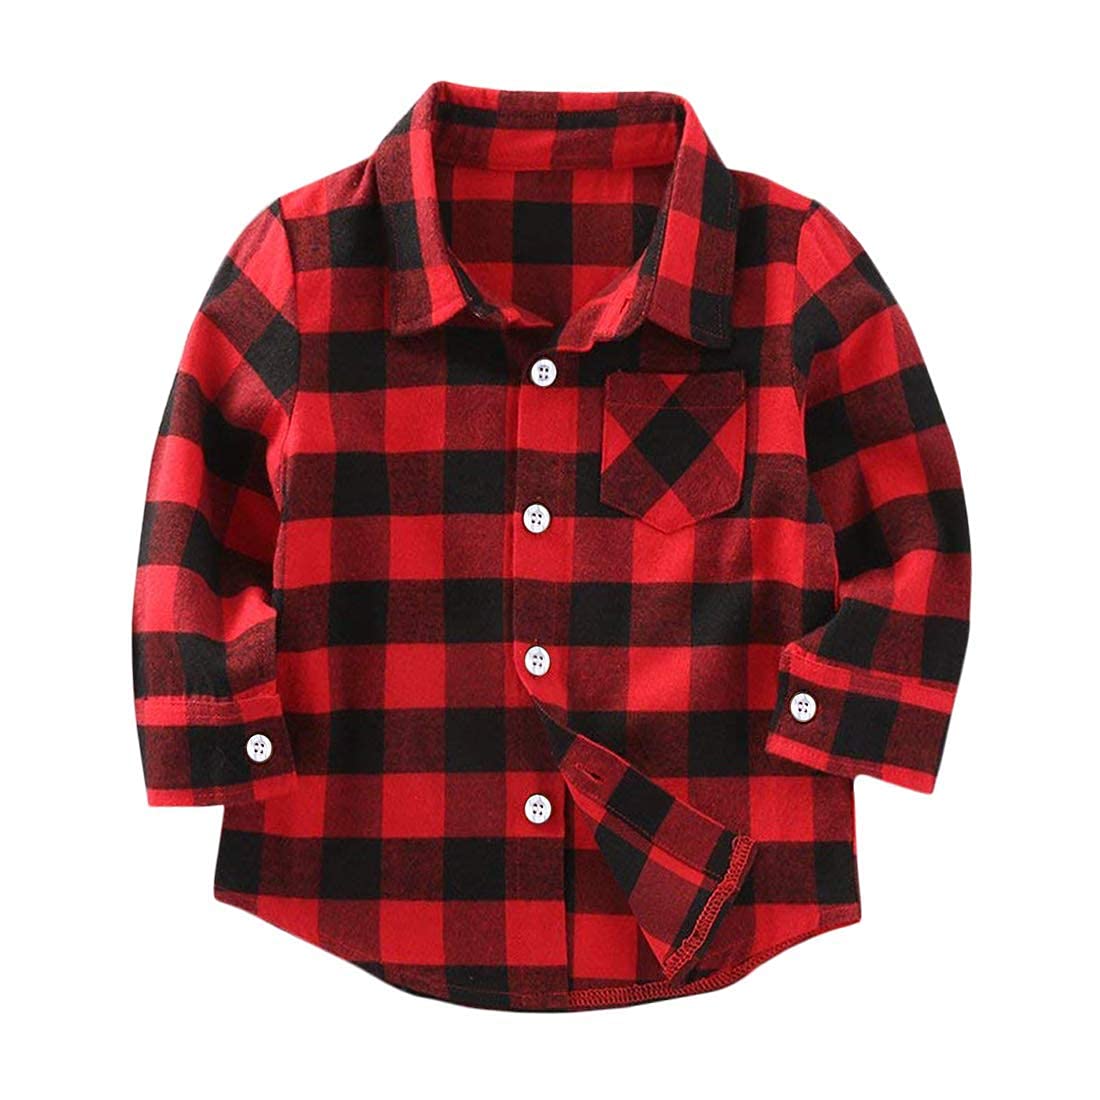 Fuermos Mens Flannel Plaid Shirt Unisex casual Button Down Shirt for Family Red-a